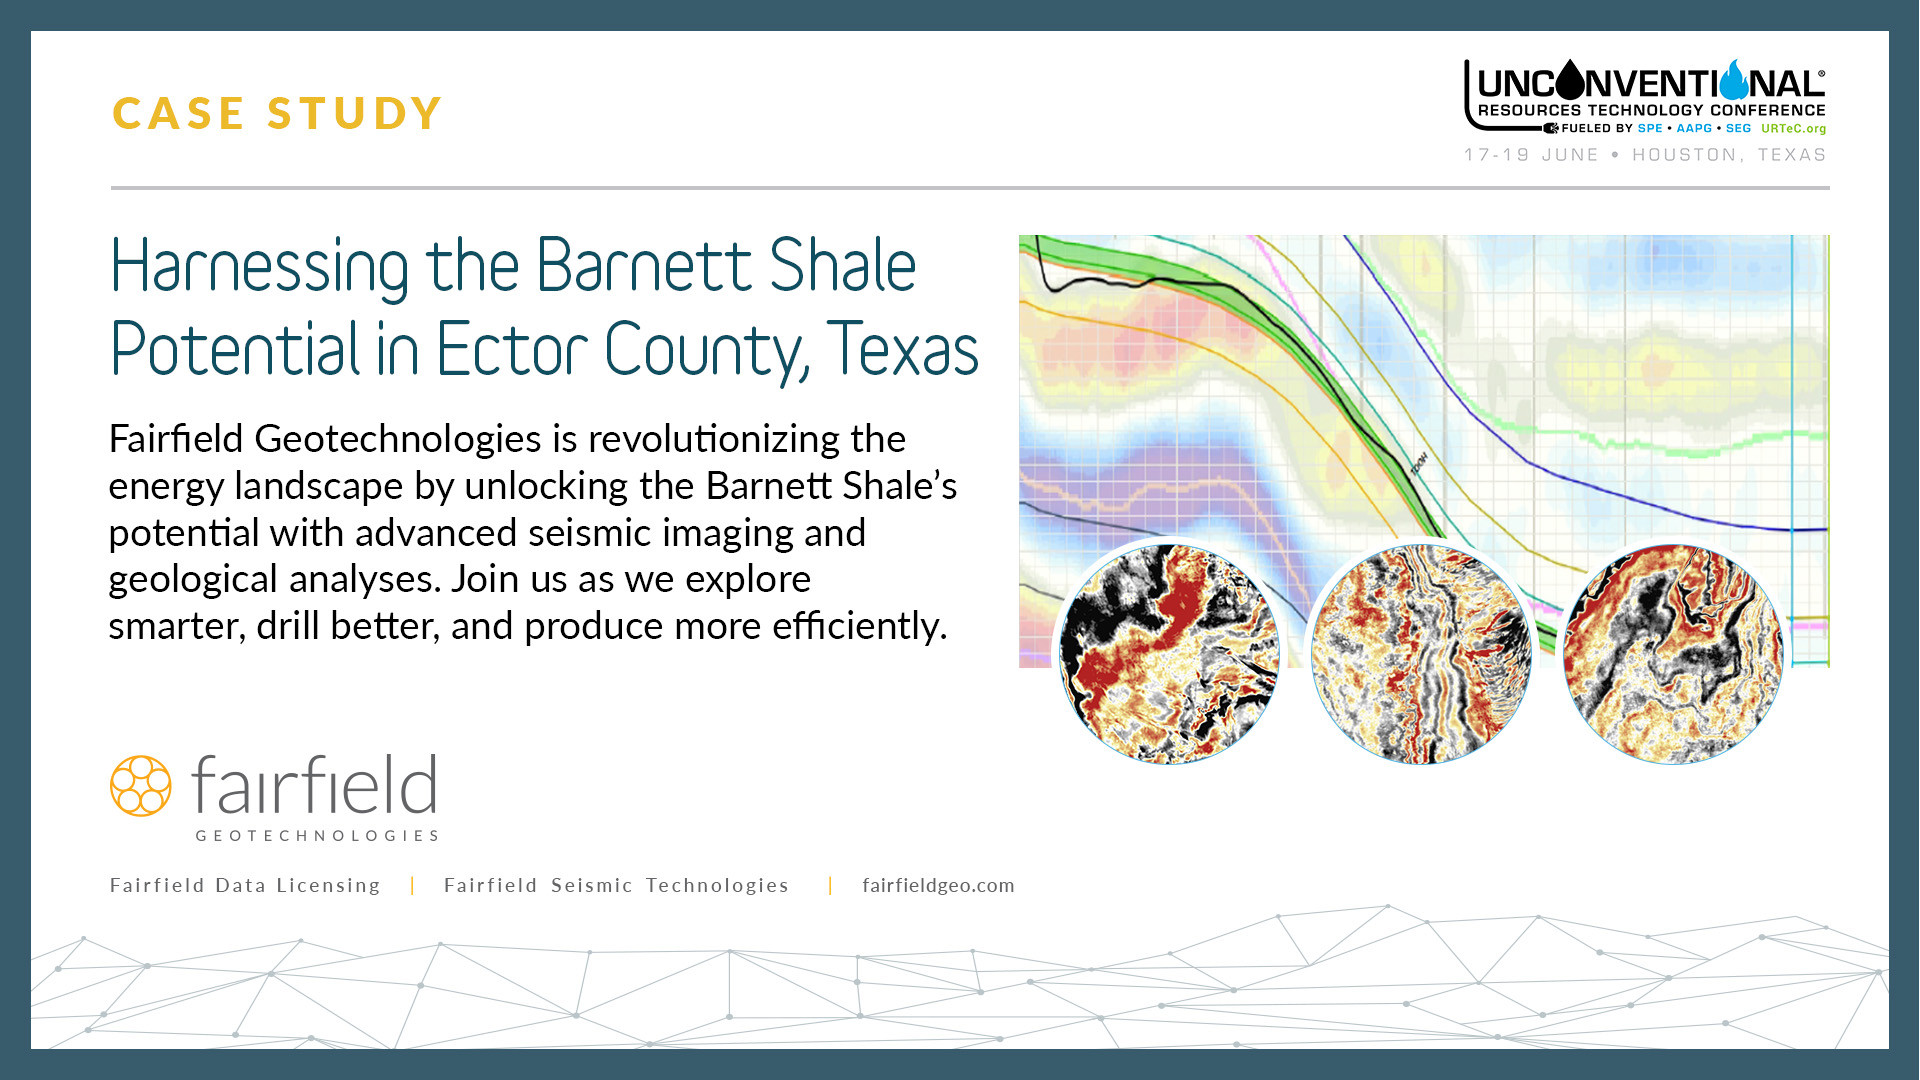 Harnessing the Barnett Shale Potential in Ector County, Texas